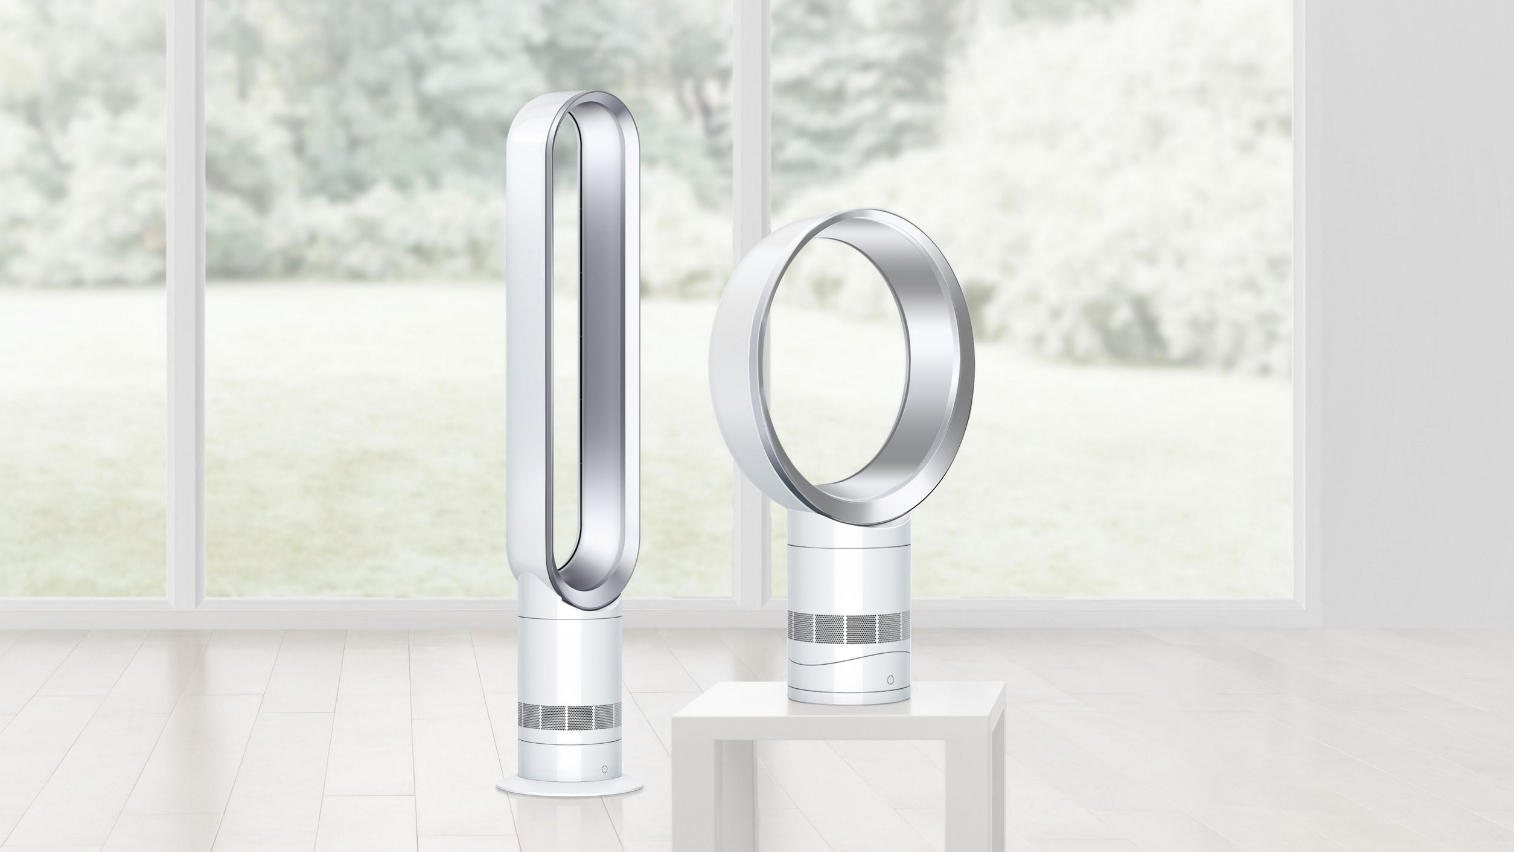 The Best Dyson Fan For Cooling Heating And Purifying 2019 pertaining to measurements 1514 X 852